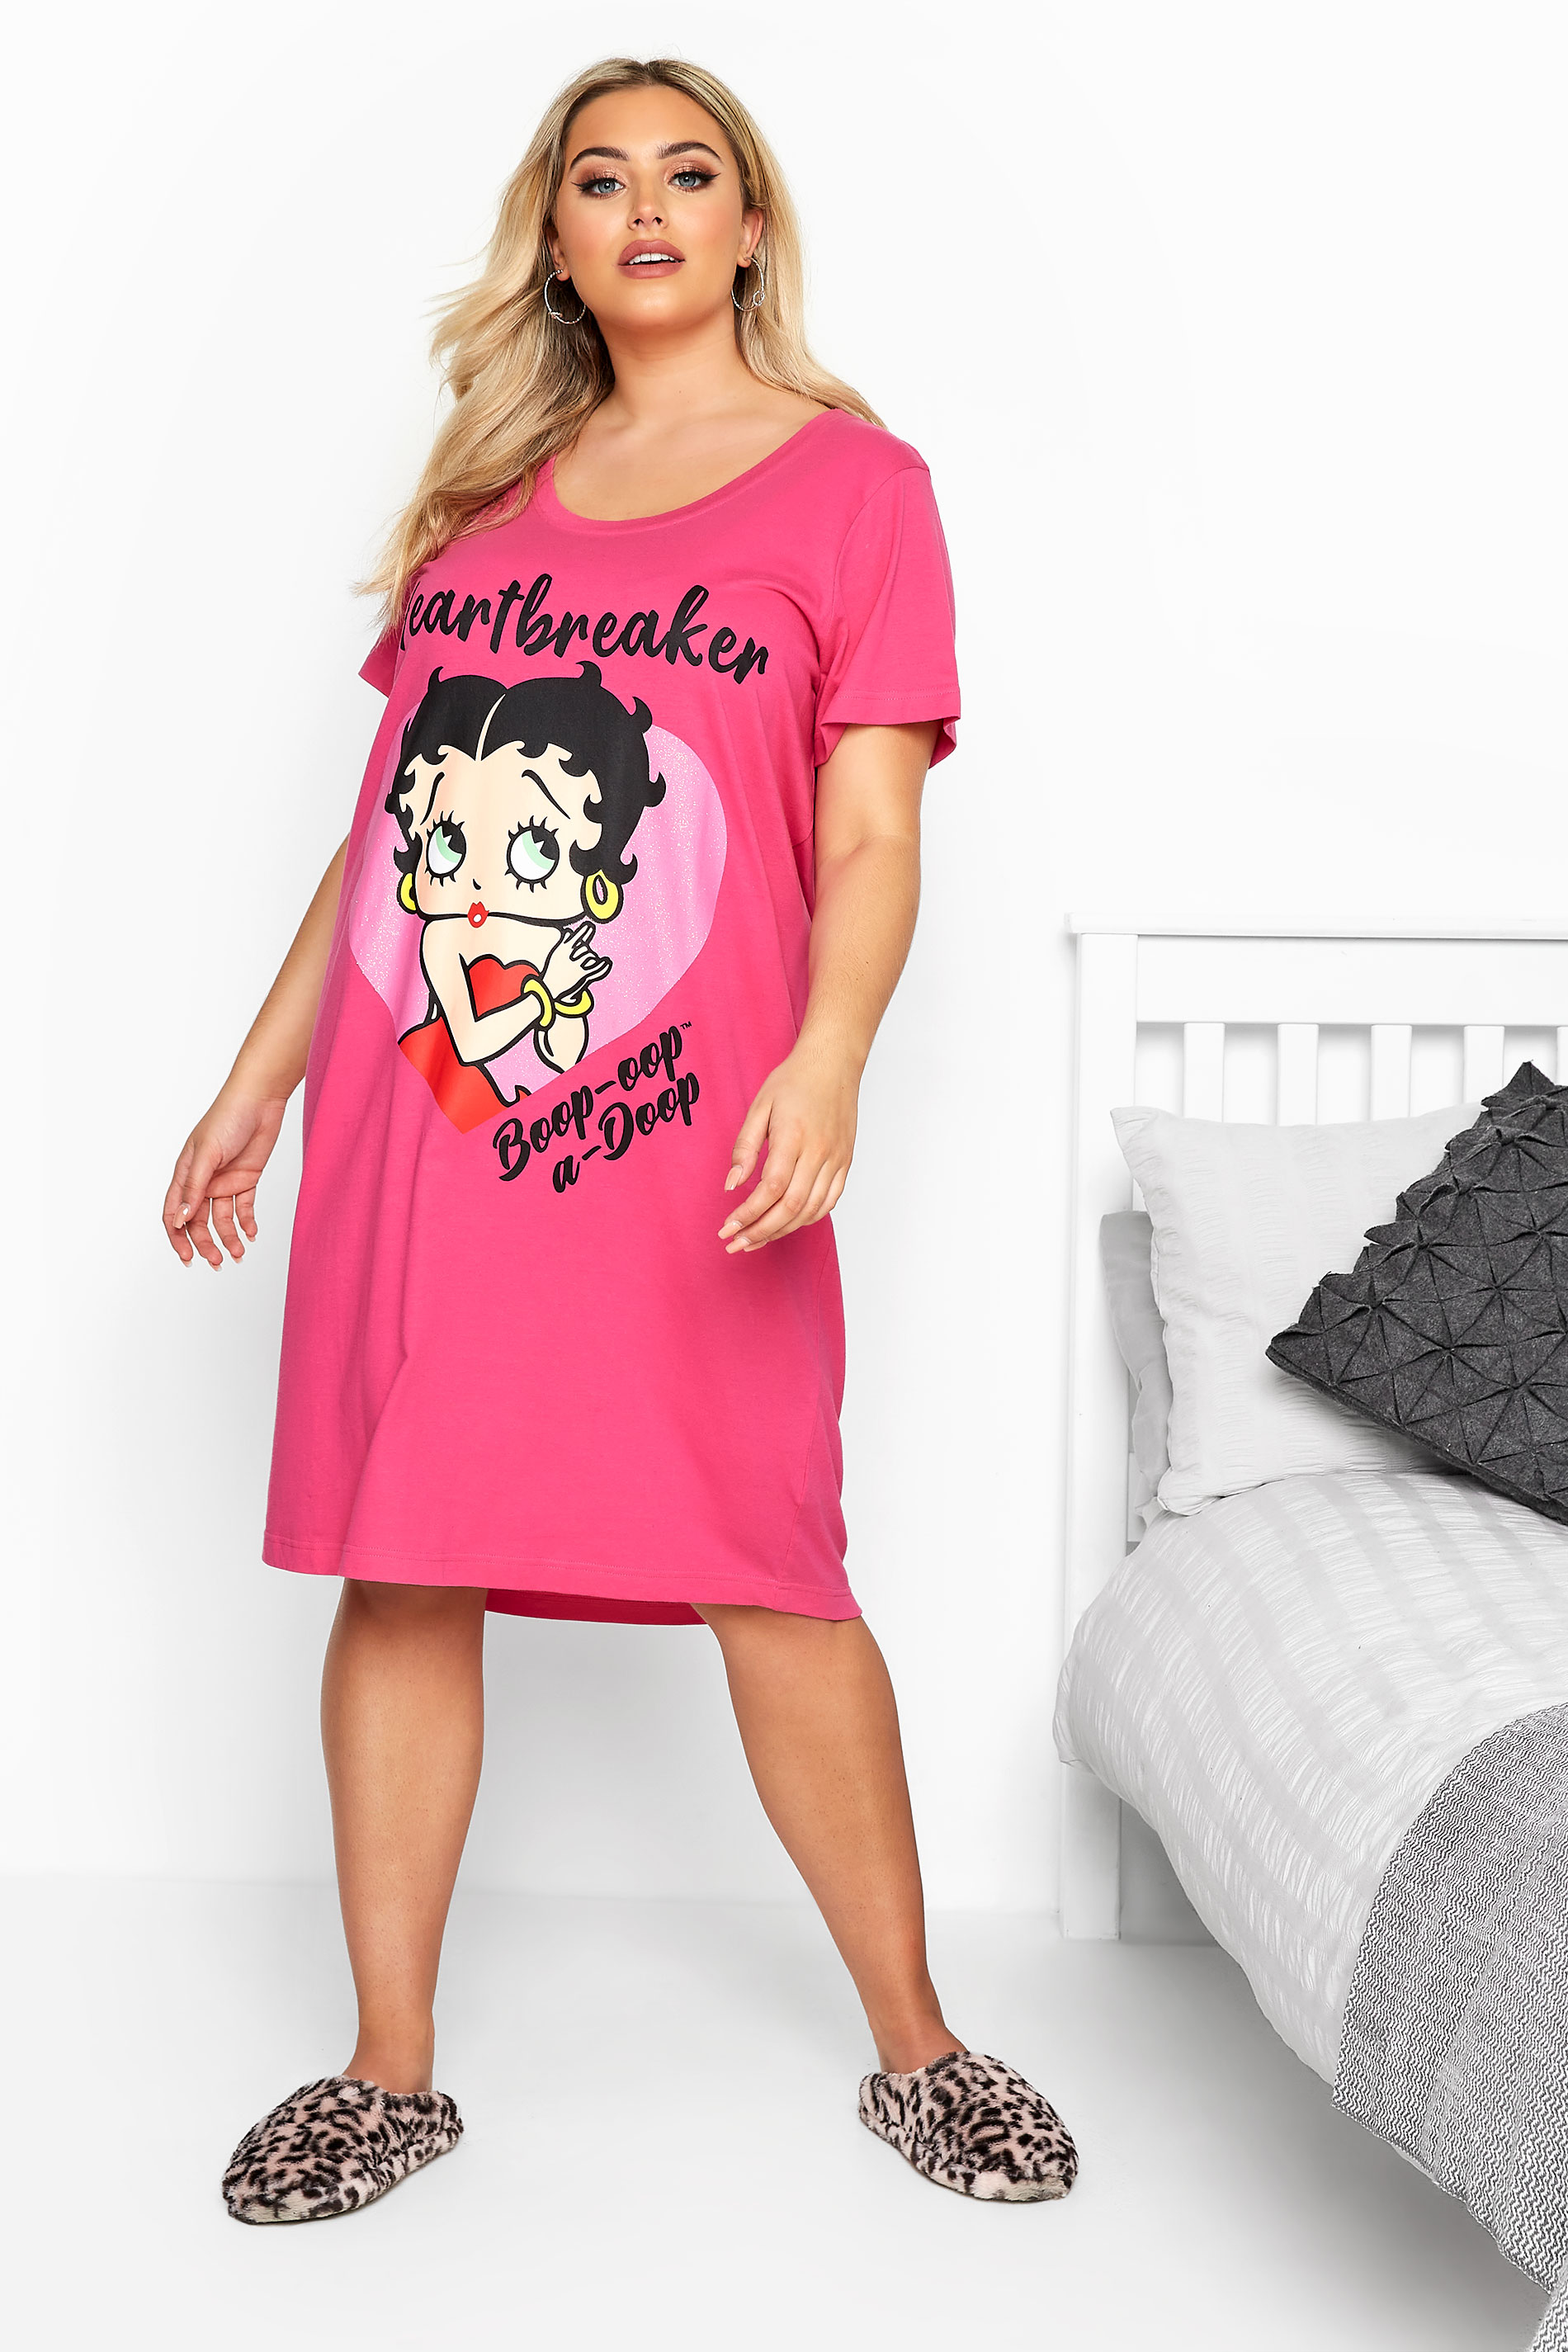 betty boop outfits